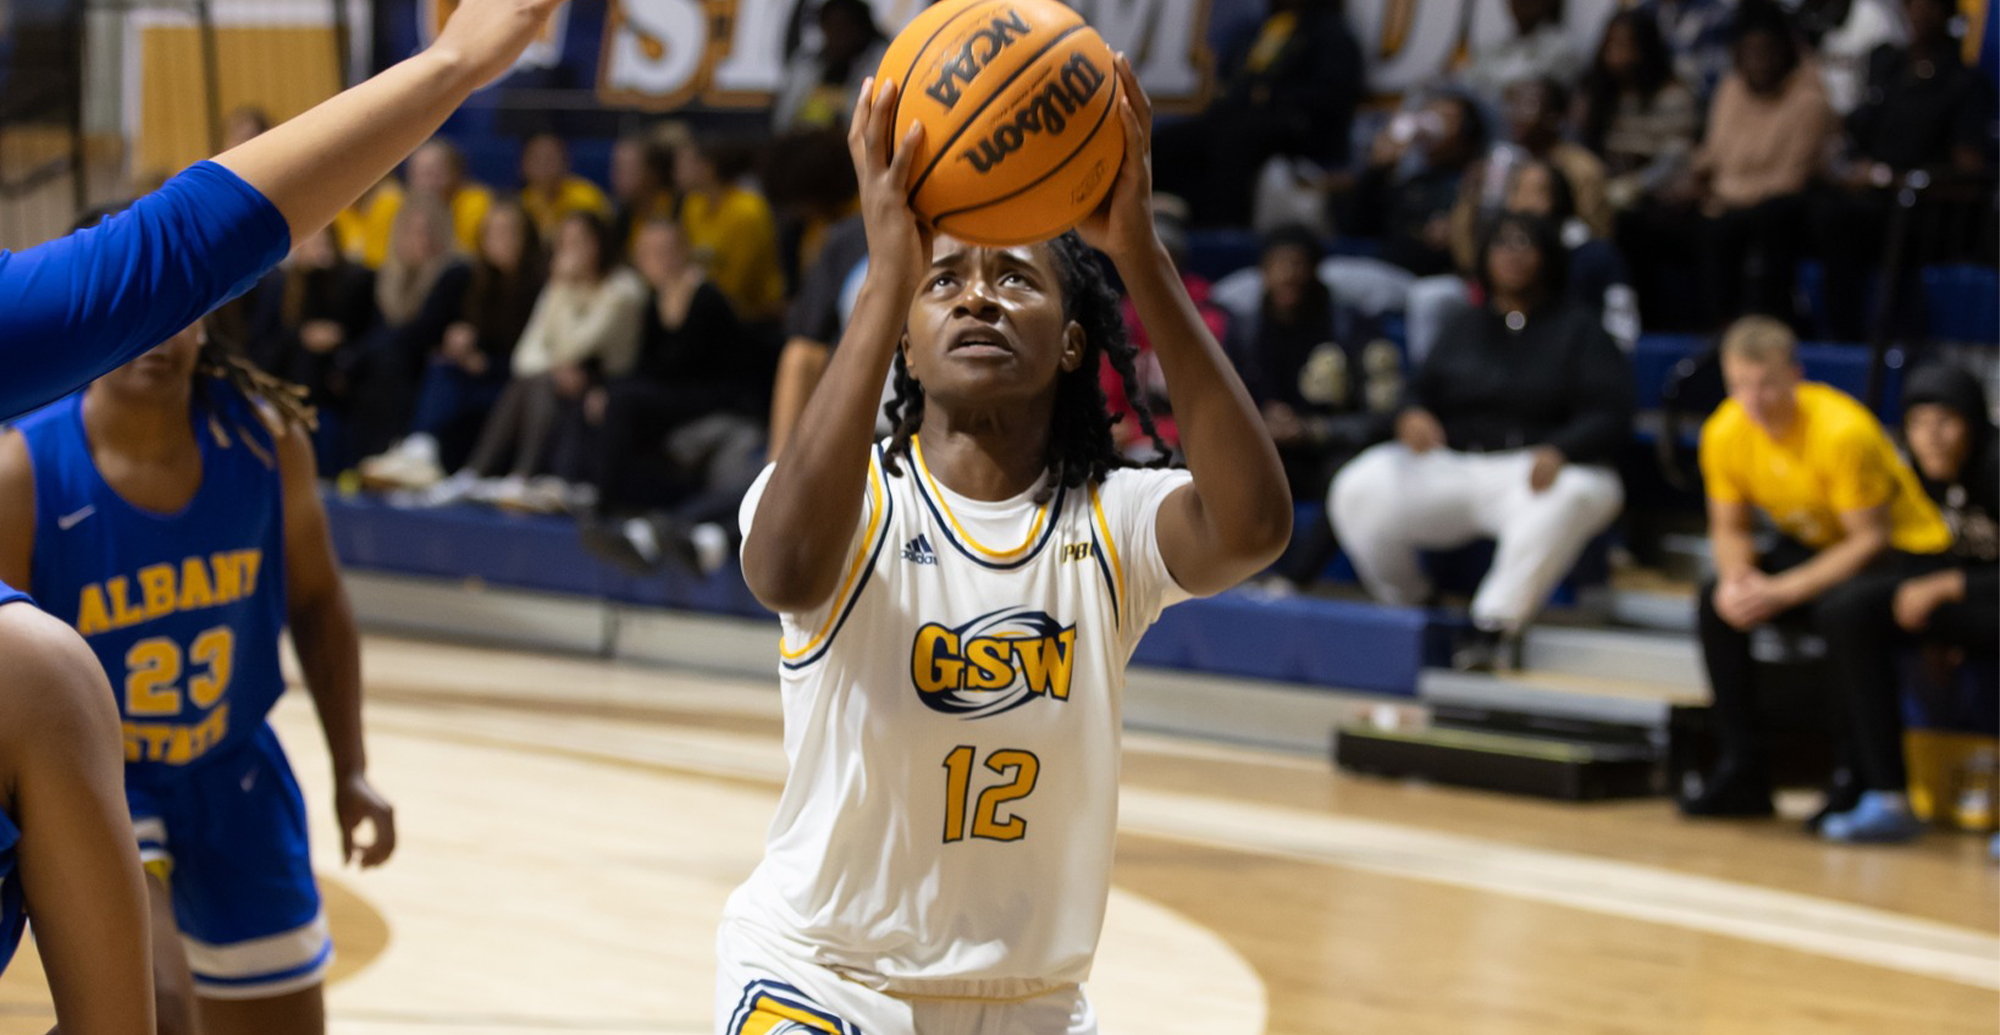 Lady Canes Break 100 Points in Blowout Win Over Tusculum